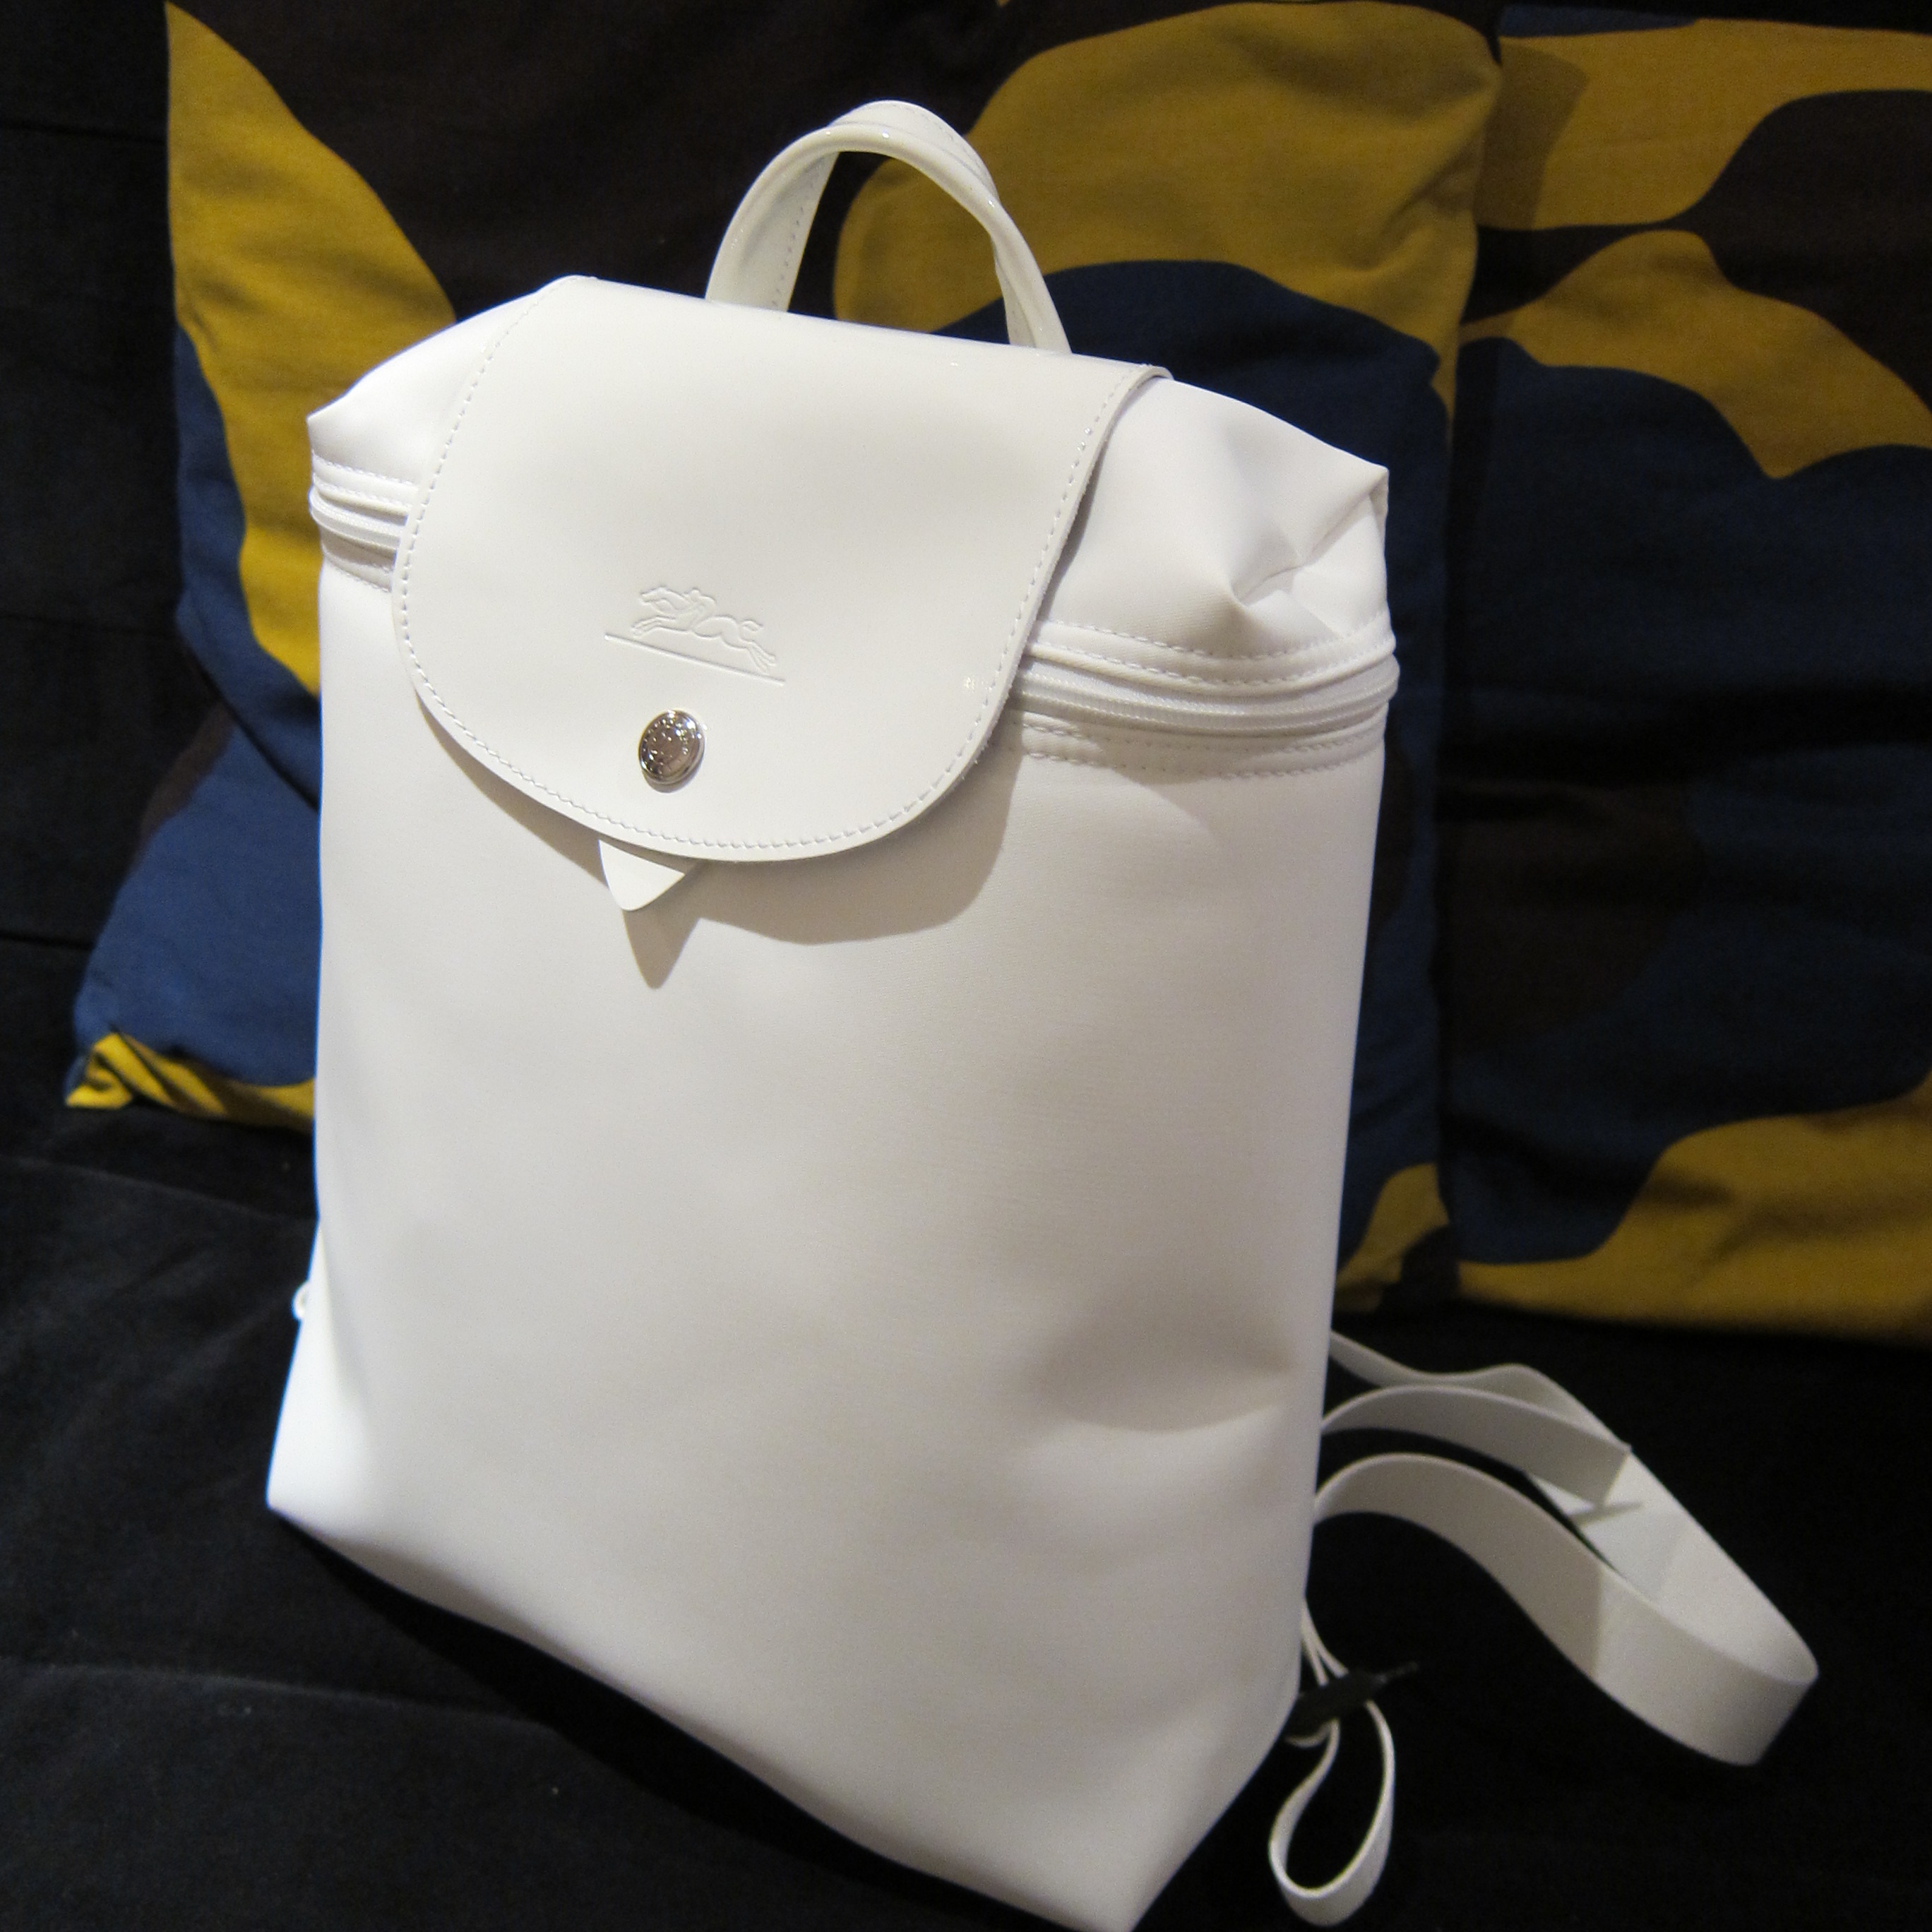 longchamp backpack limited edition